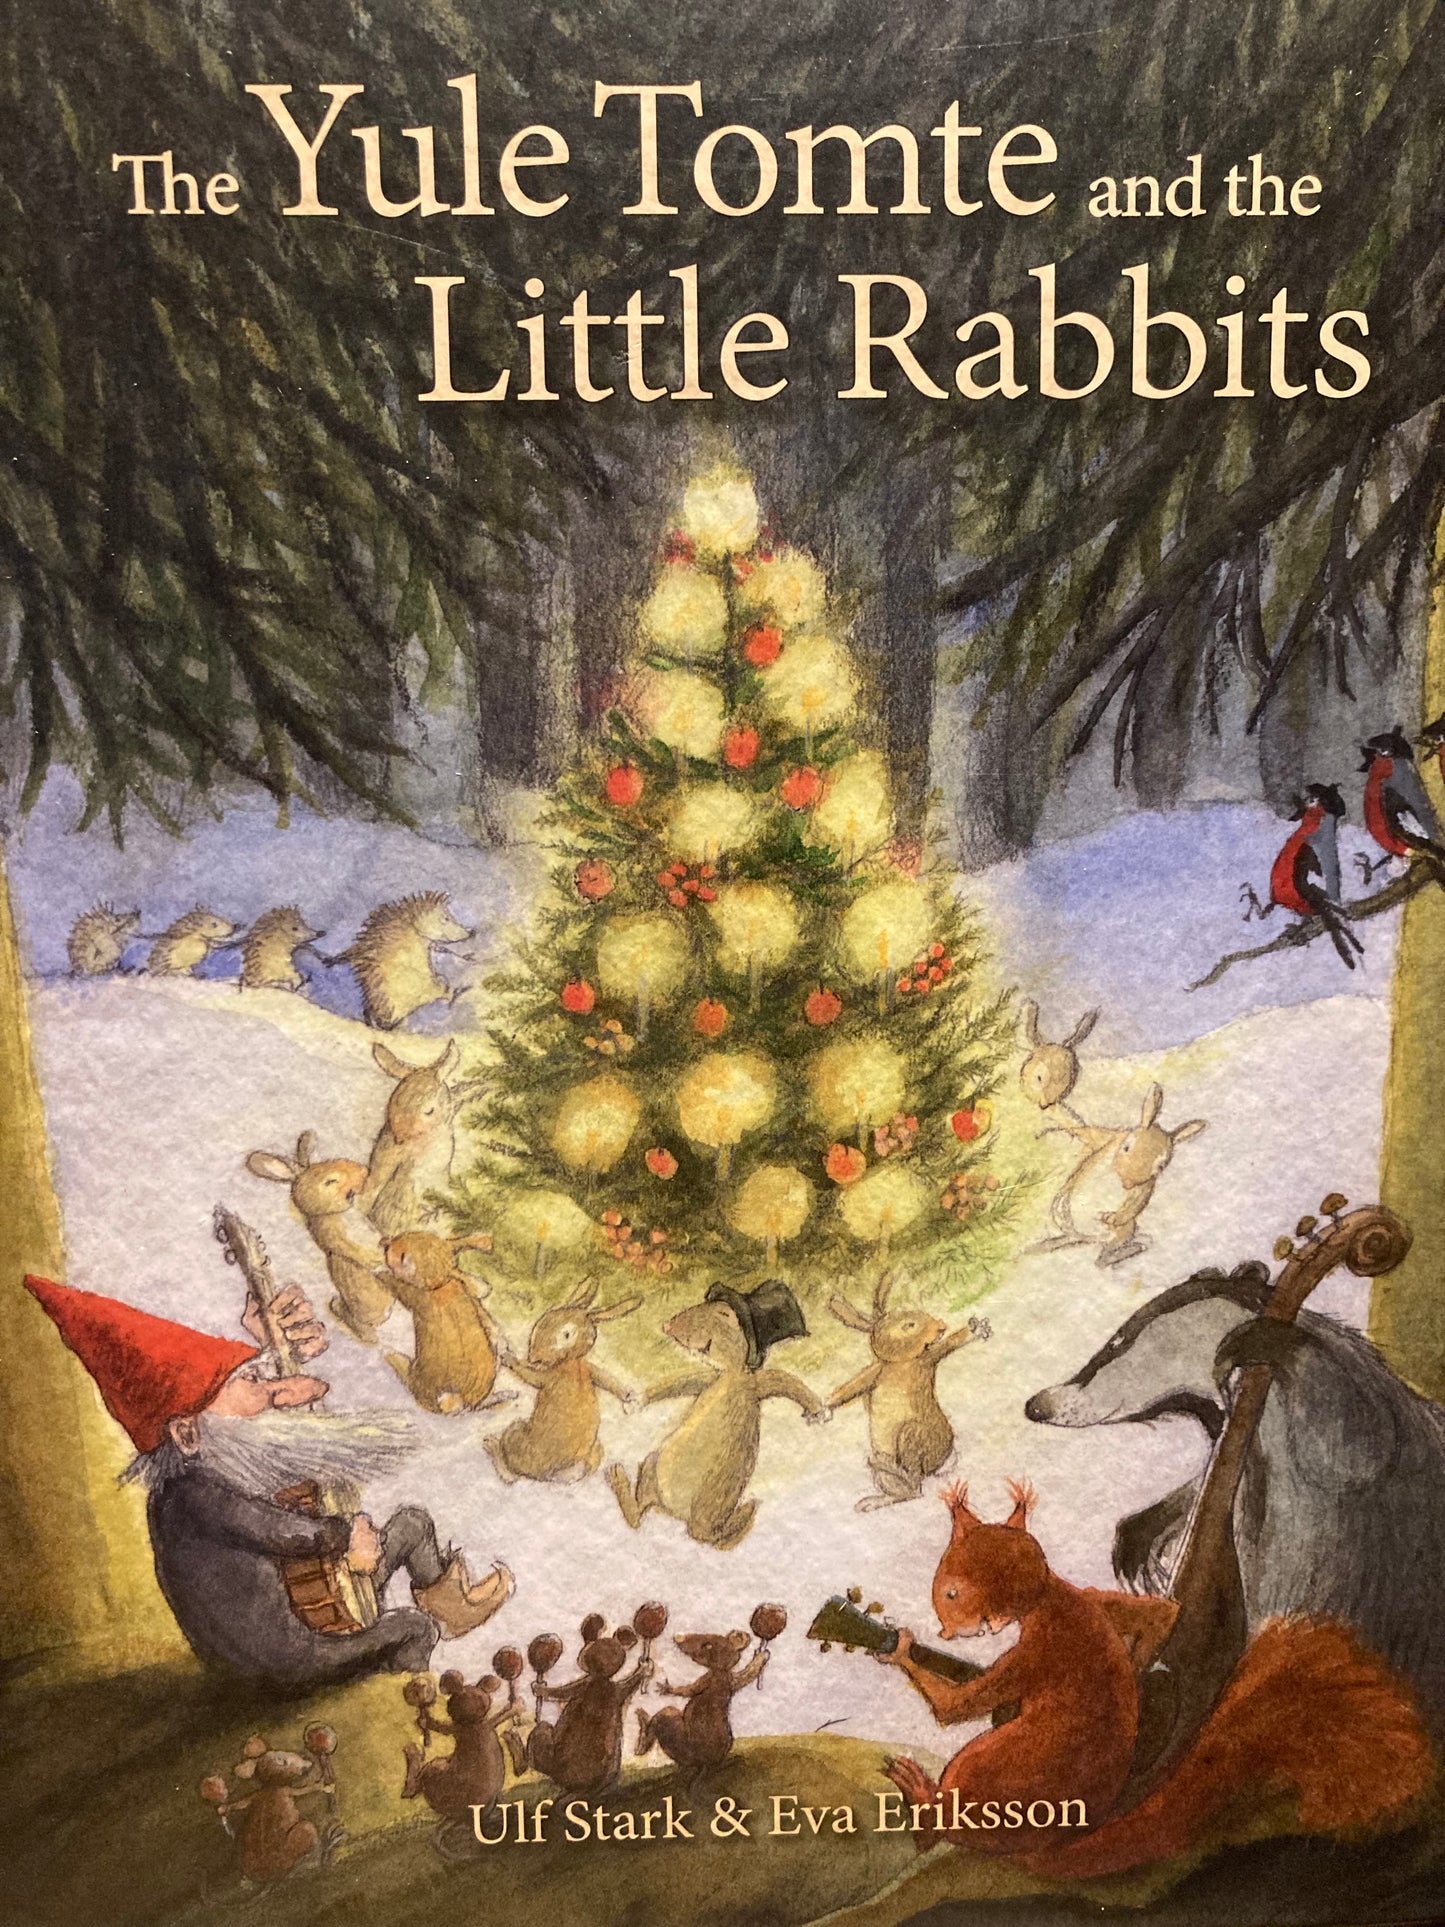 Children’s Chapter Picture Book - THE YULE TOMTE AND THE LITTLE RABBITS